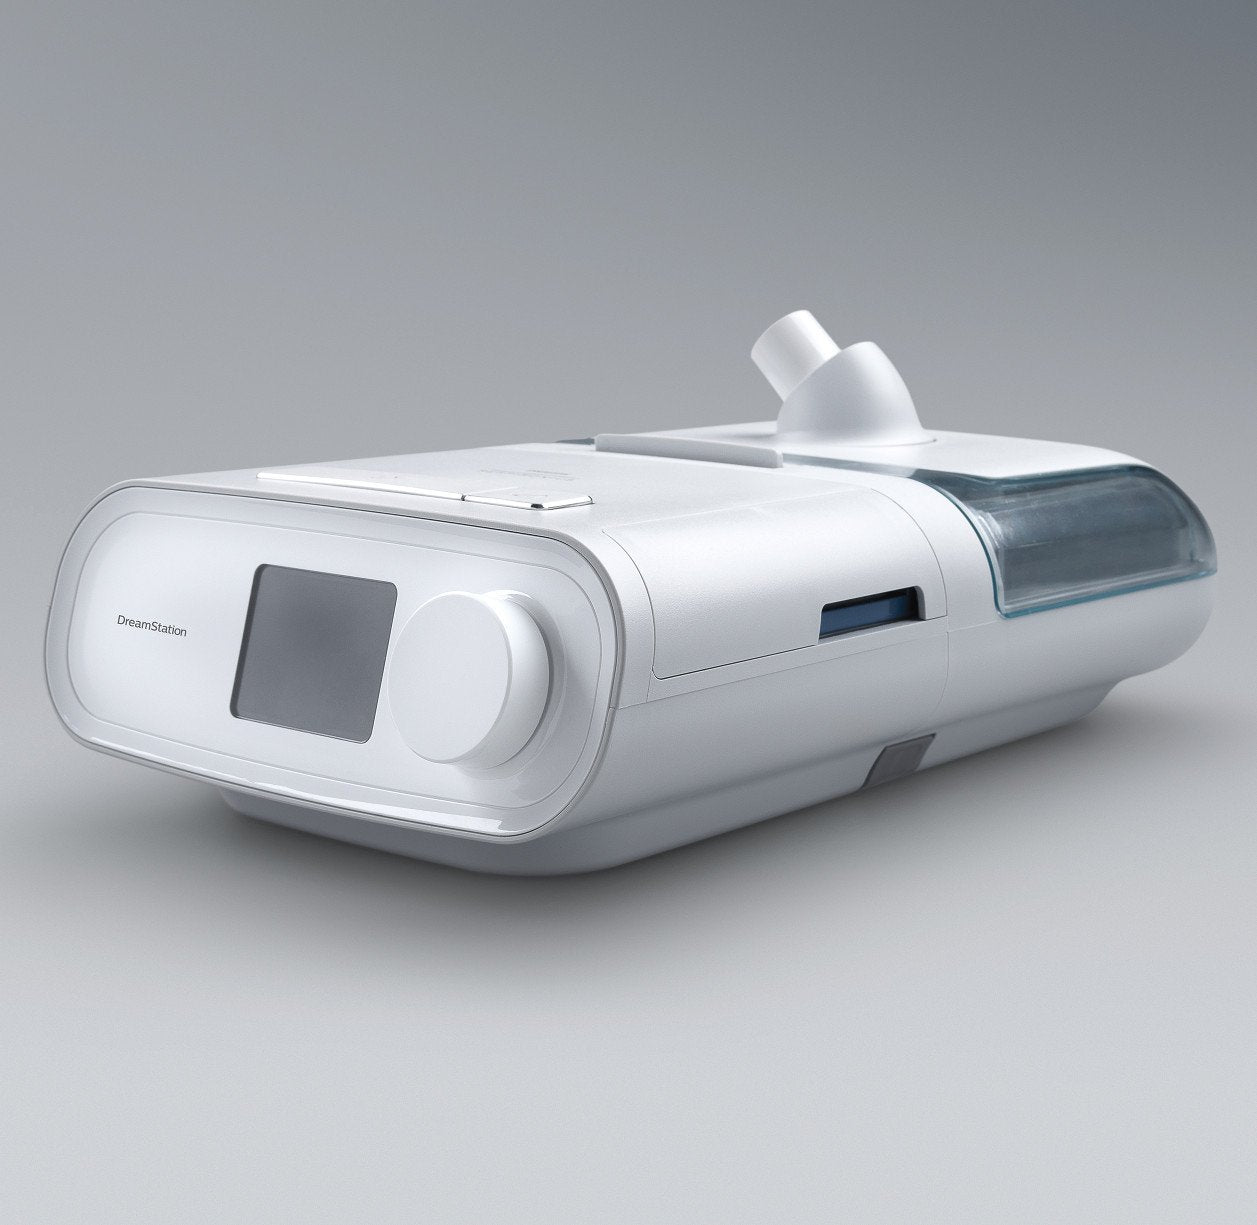 Philips Dreamstation Auto CPAP with Heated Humidifier CAX500T12 with WI-FI Module